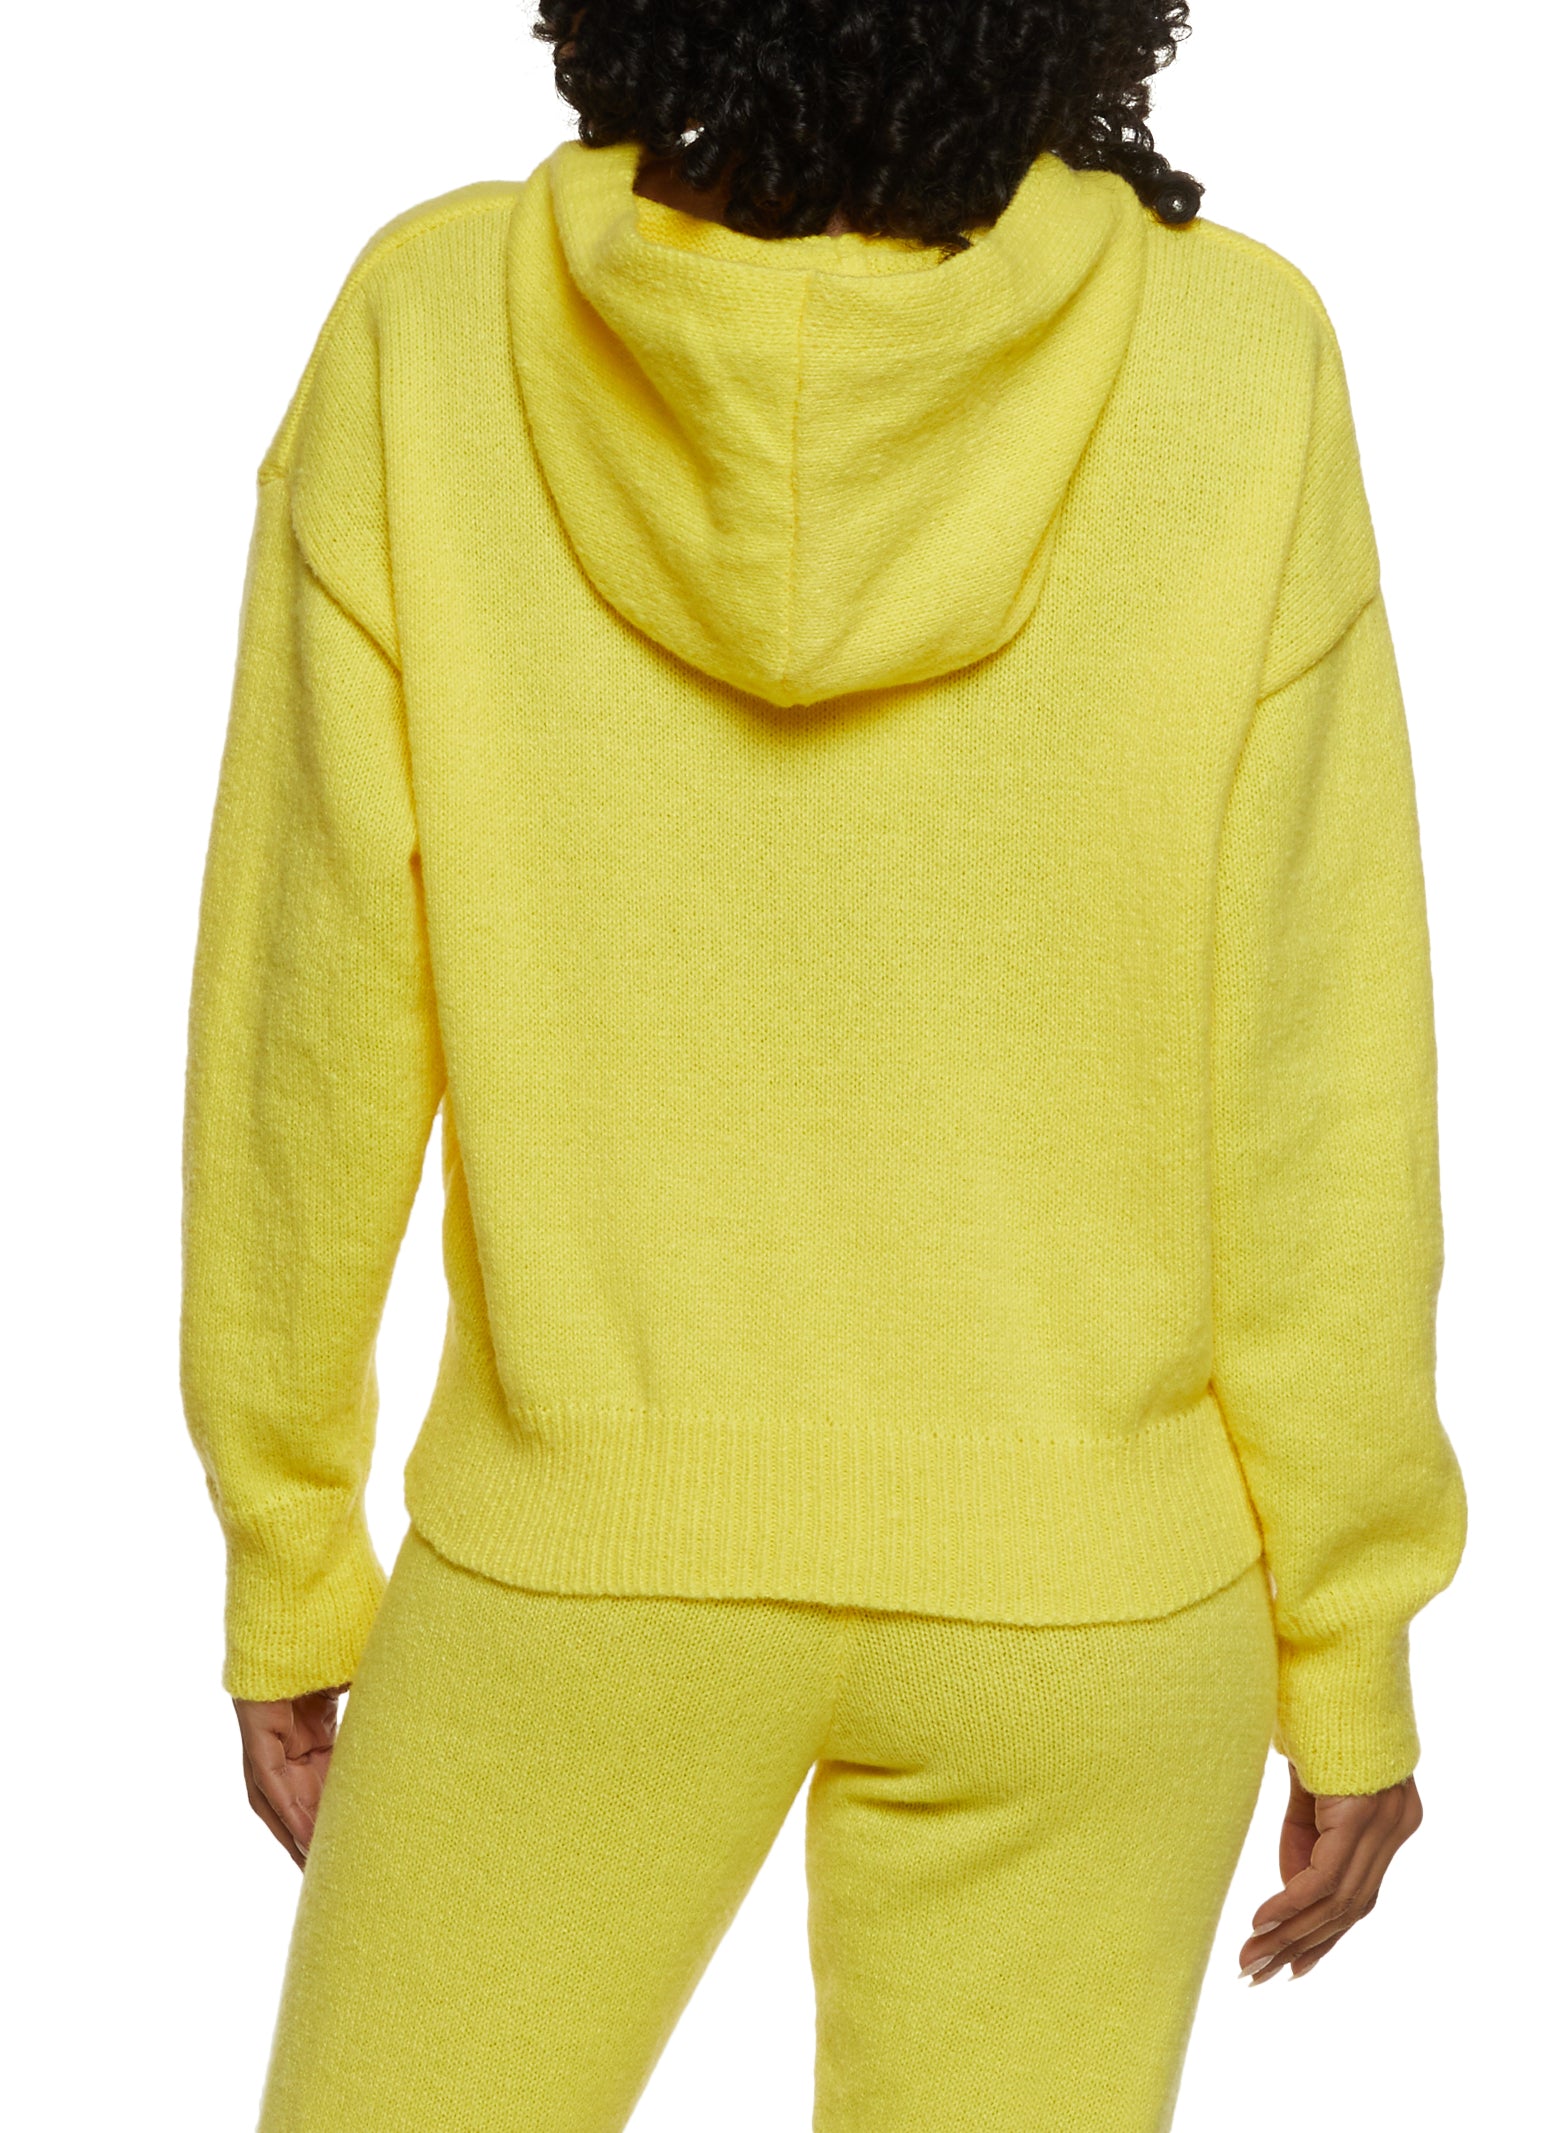 Womens Brushed Knit Hooded Sweater, Yellow, Size S